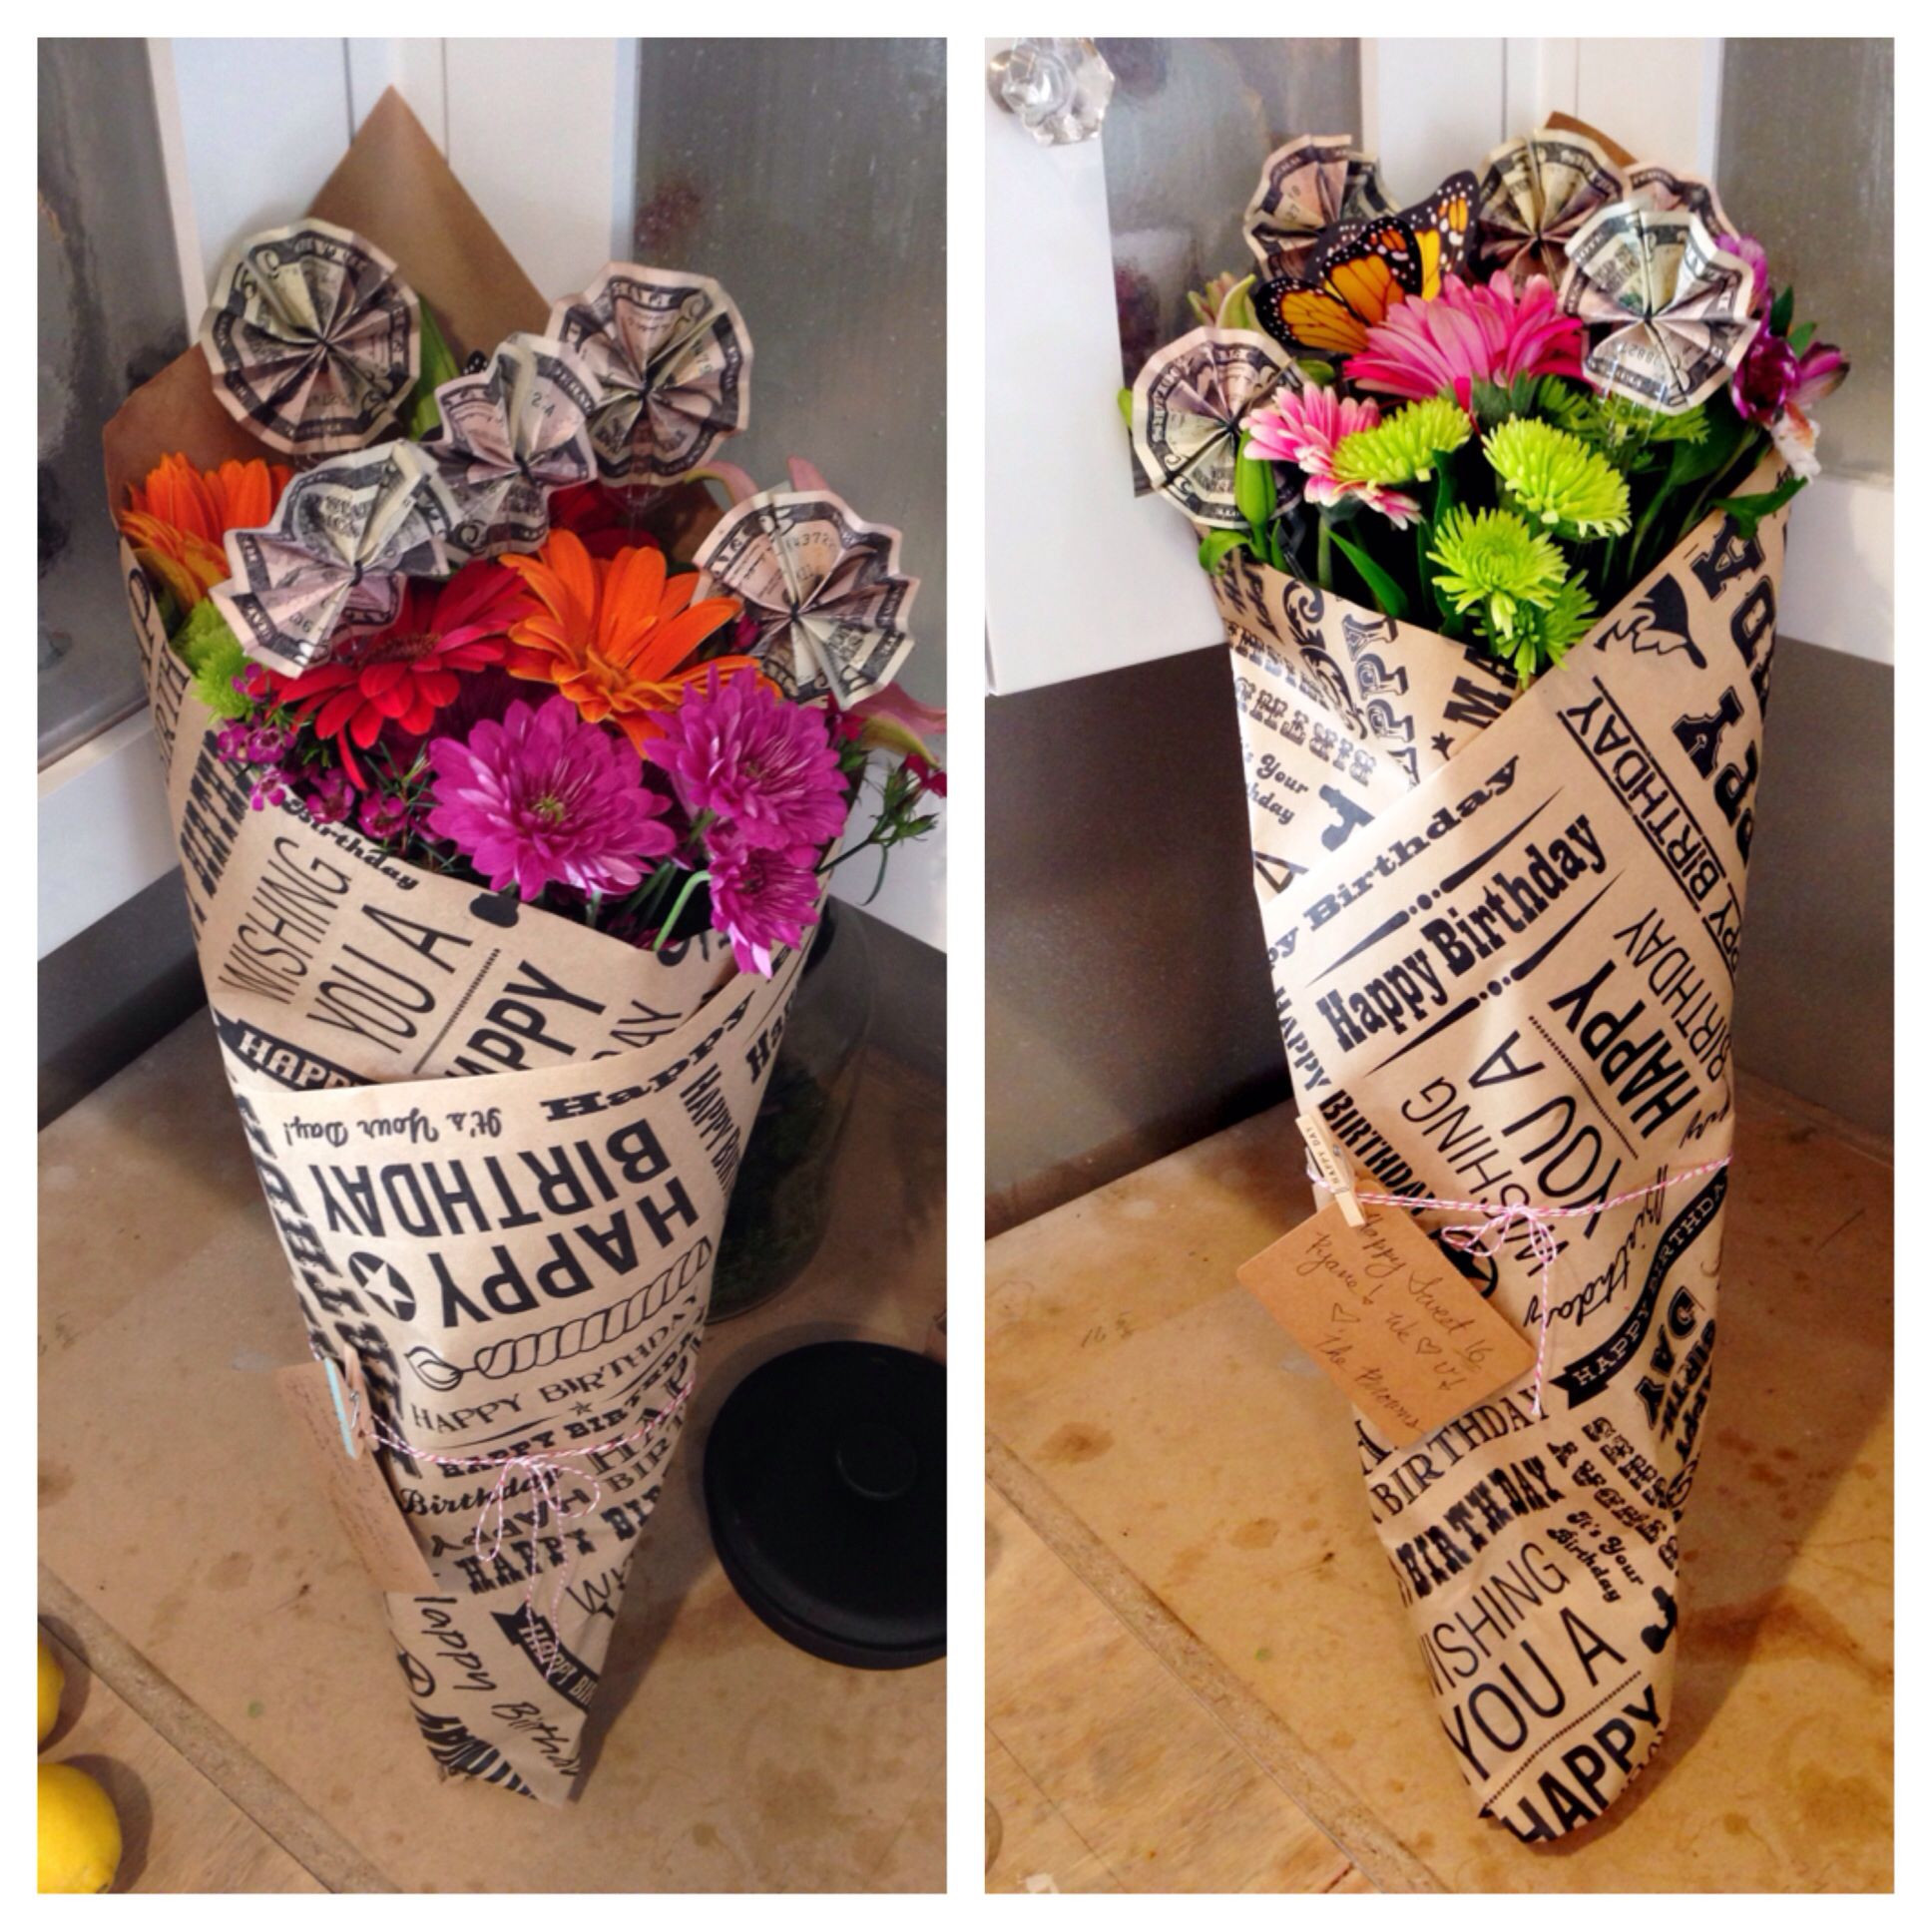 Gift Ideas For My Girlfriend
 Teen girl t ideas money bouquets Made these for my